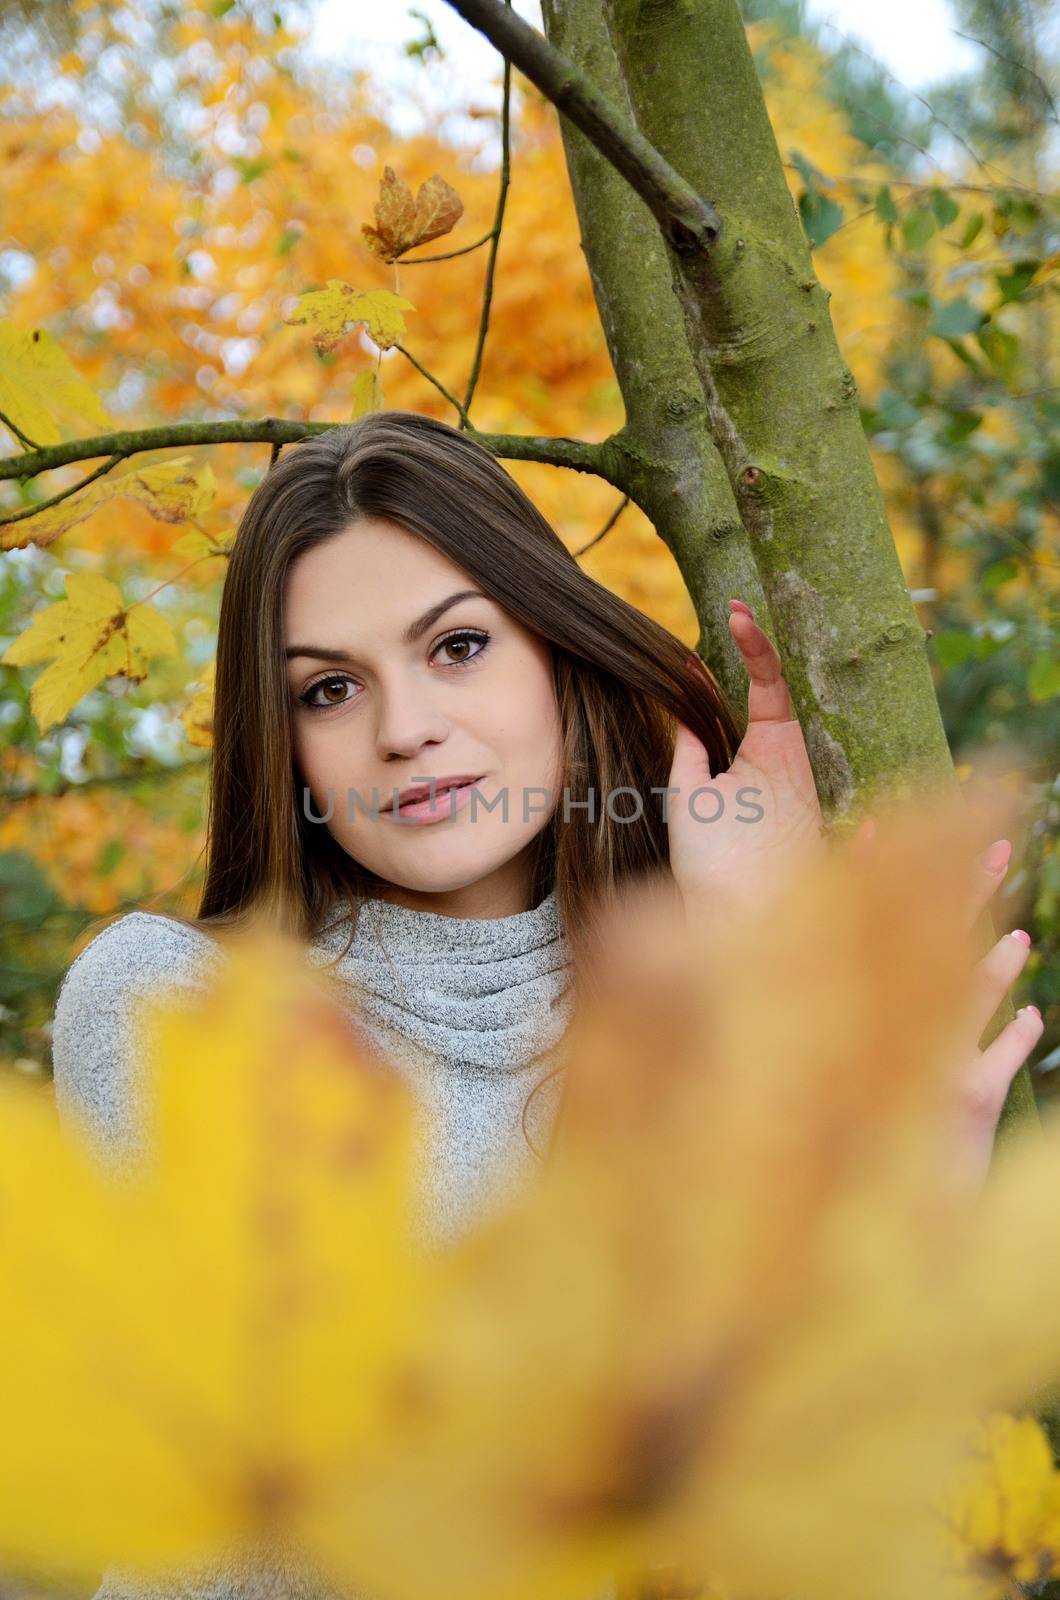 Polish forest with colorful leaves. Portrait of young female model with autumn scenery. 